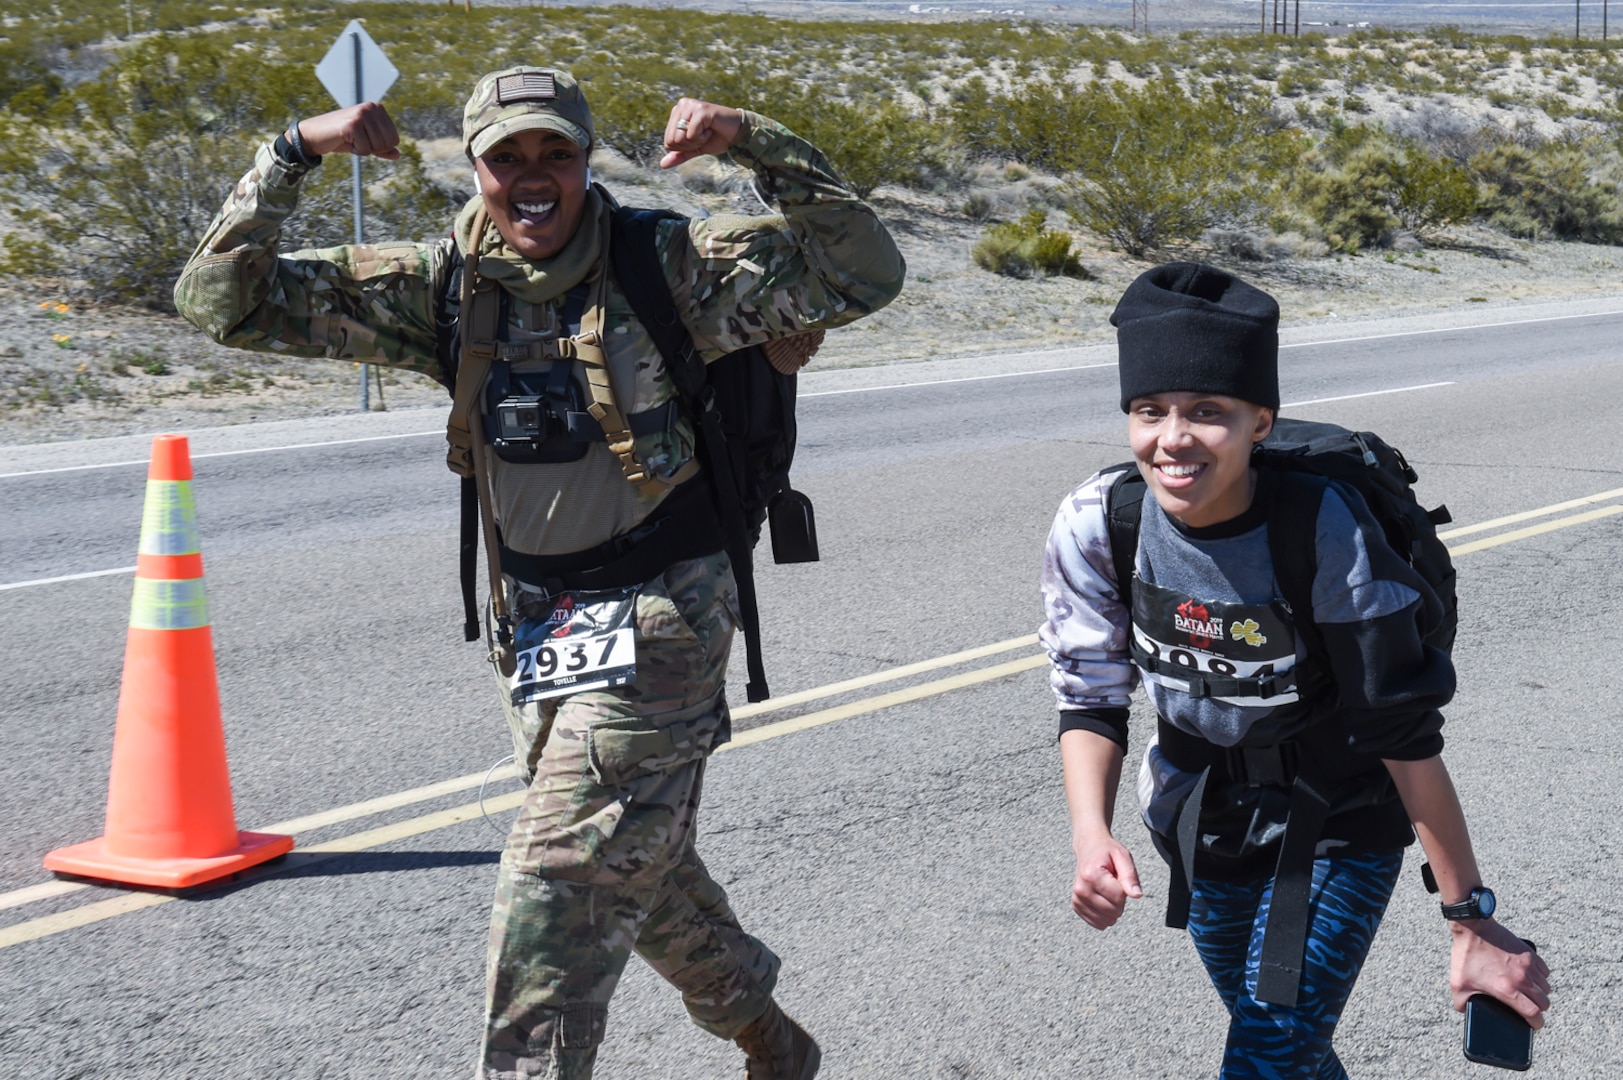 Even after marching 18.5 miles, spirits remained high for both Staff Sgt. Toyelle Rickson and Petty Officer 1st Class Aretha Carmouche during the Bataan Memorial Death March, in White Sands, New Mexico, March 17, 2019.